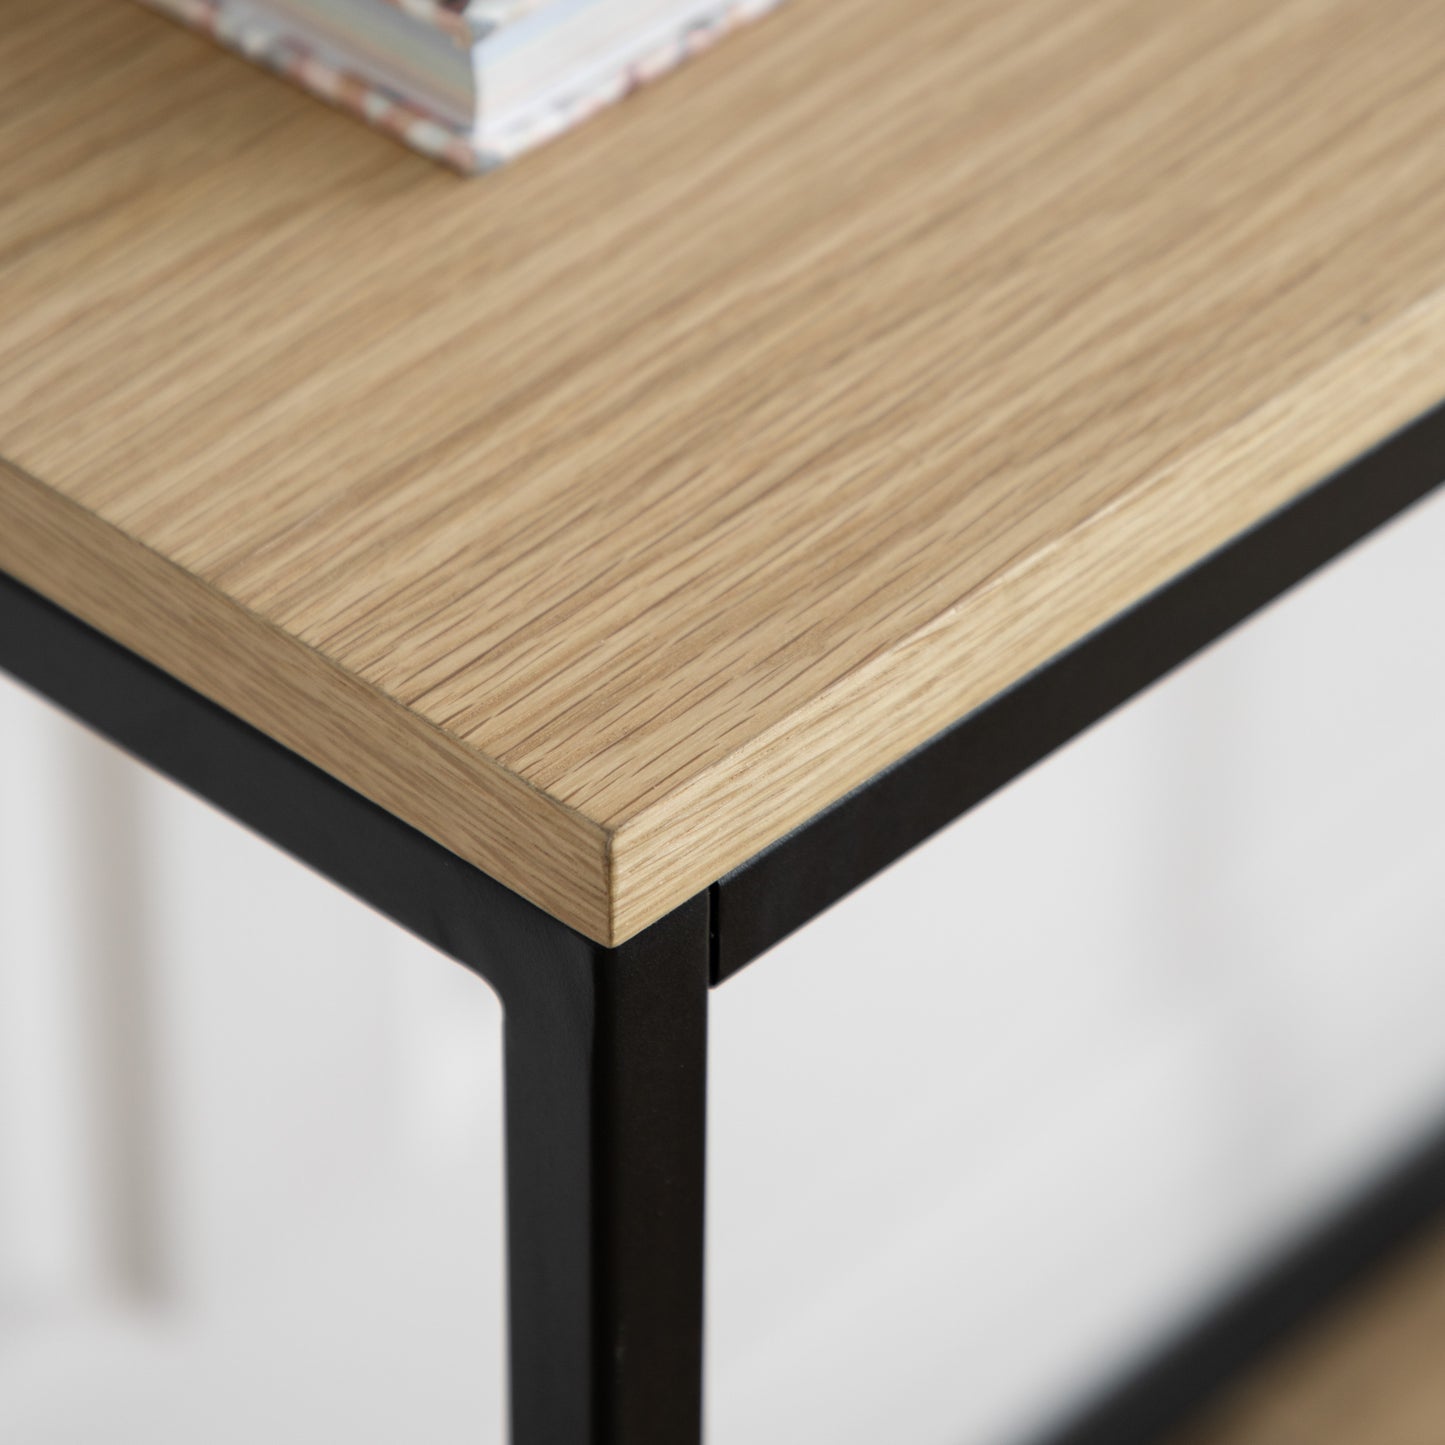 A close up of a Staverton Console Table 1000x380x750mm from Kikiathome.co.uk with a book on it, showcasing interior decor.